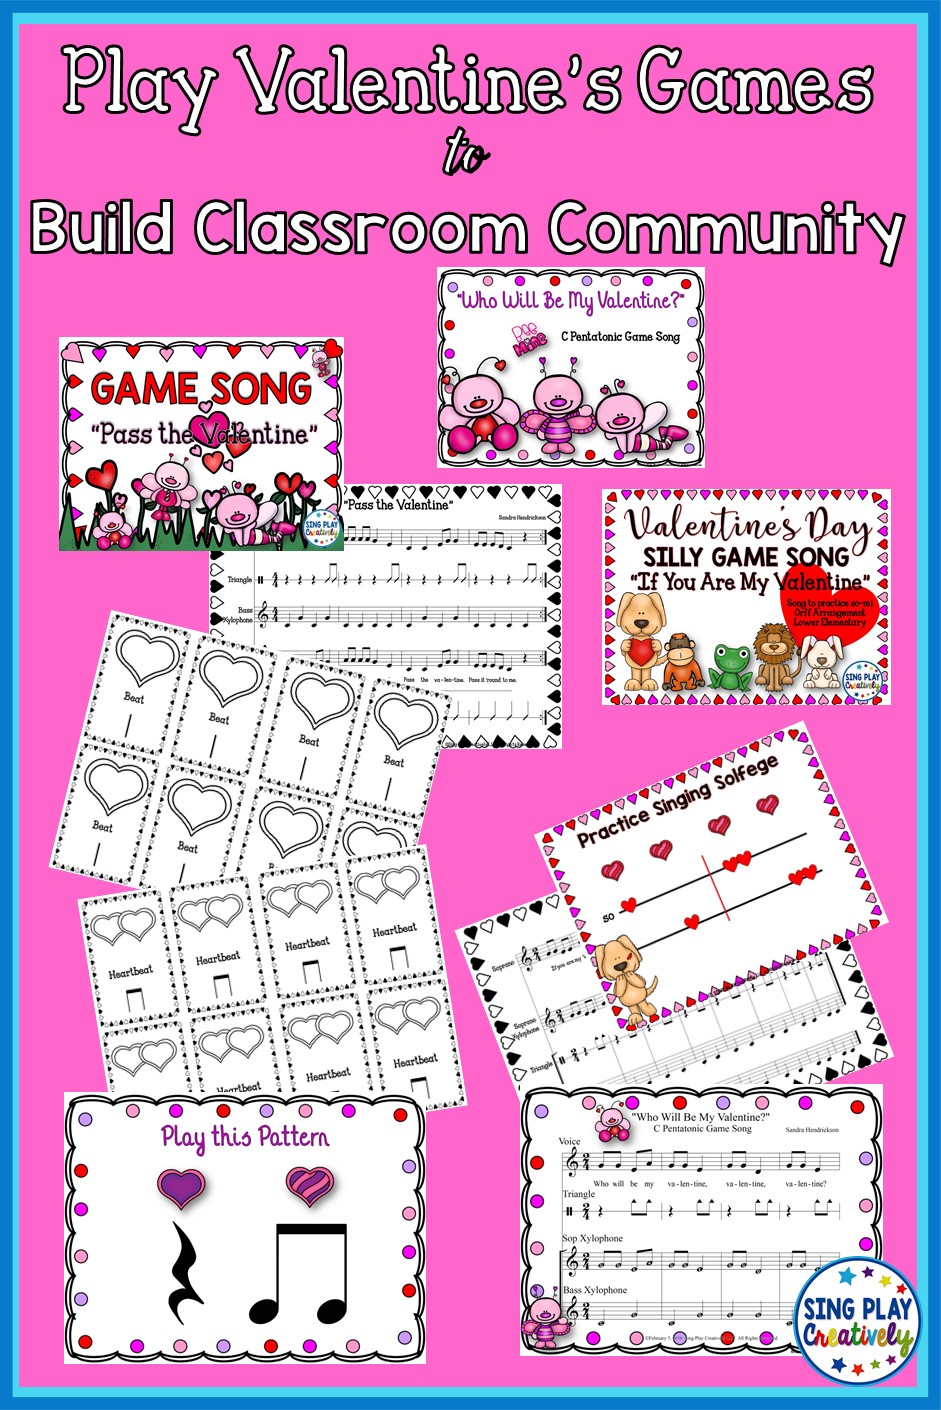 You are currently viewing Play Valentine’s Games to Build Classroom Community